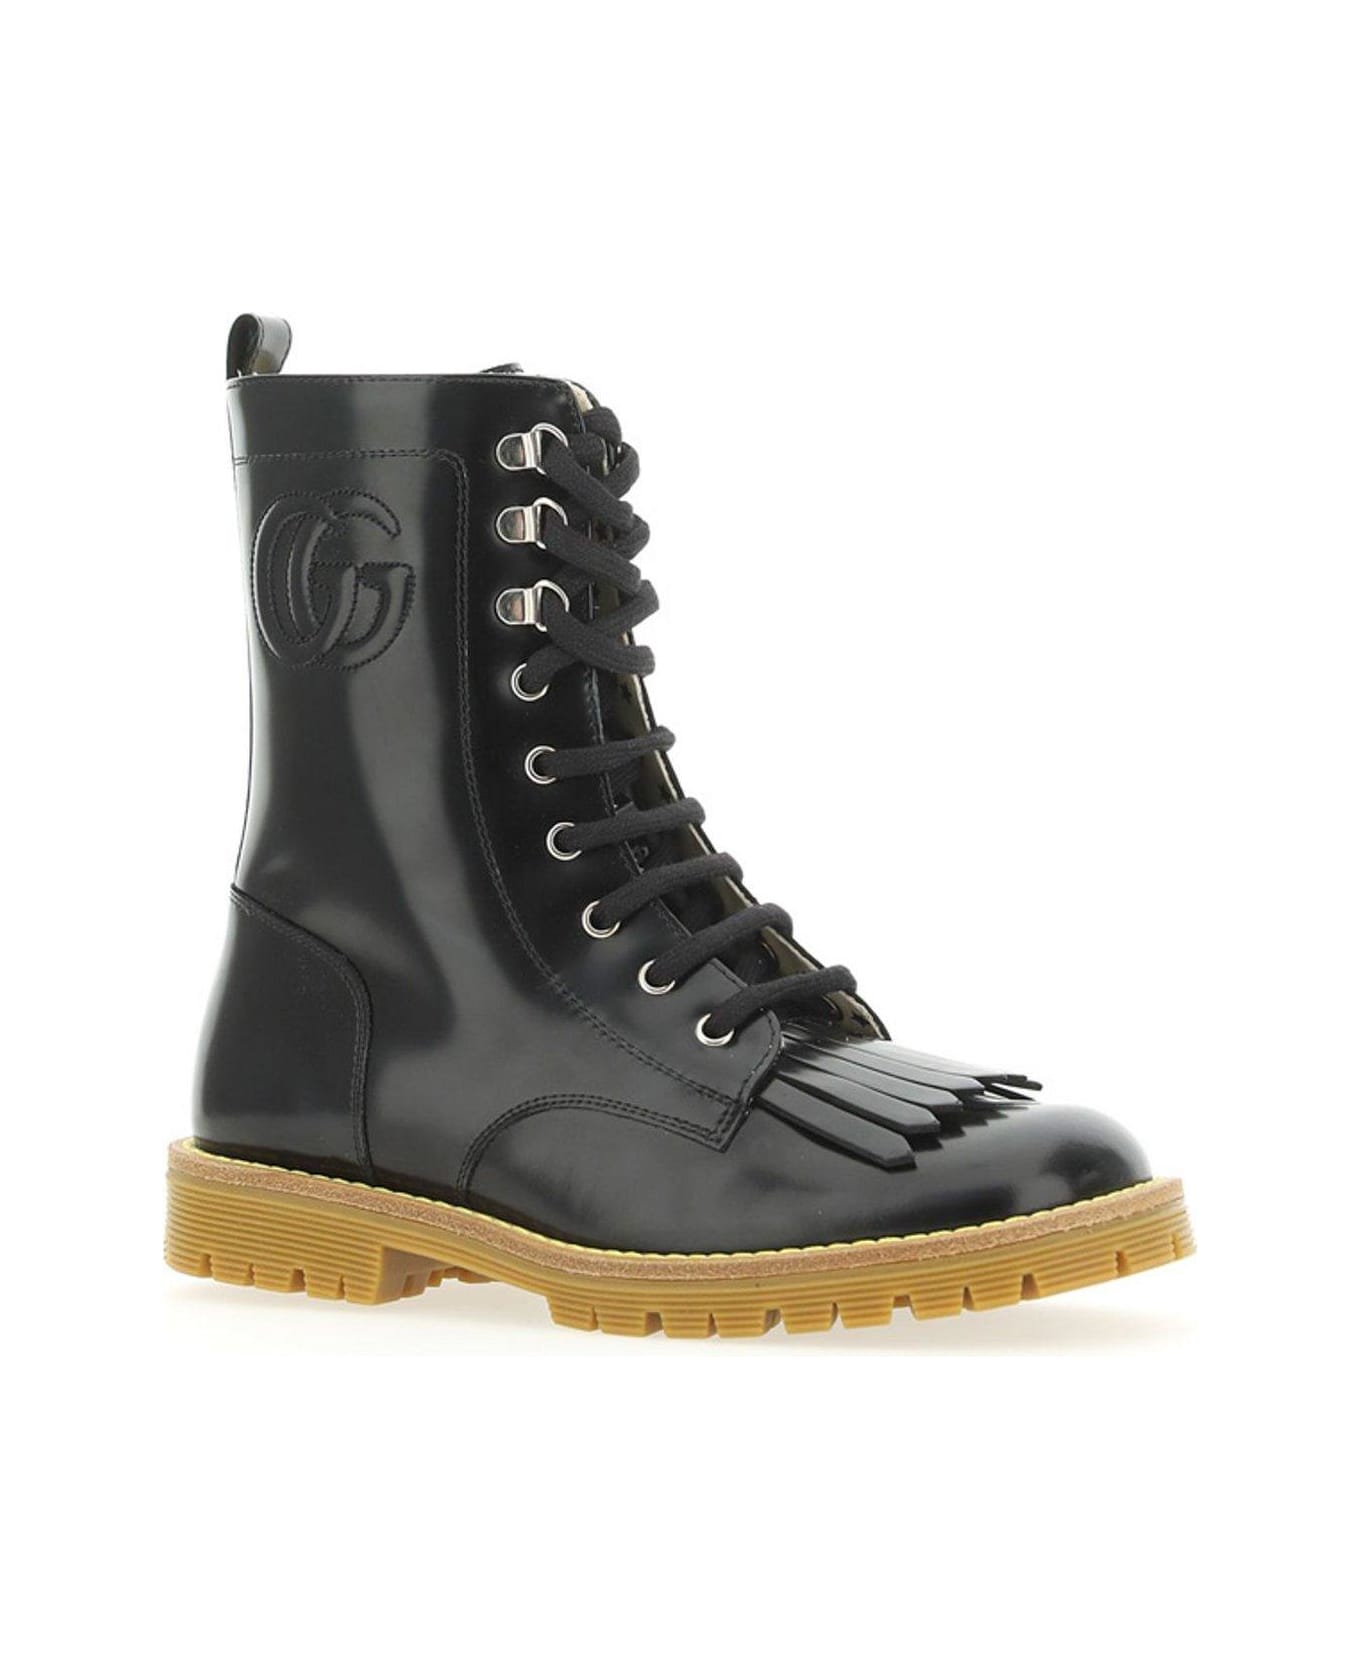 Gucci Logo Detailed Lace-up Boots シューズ